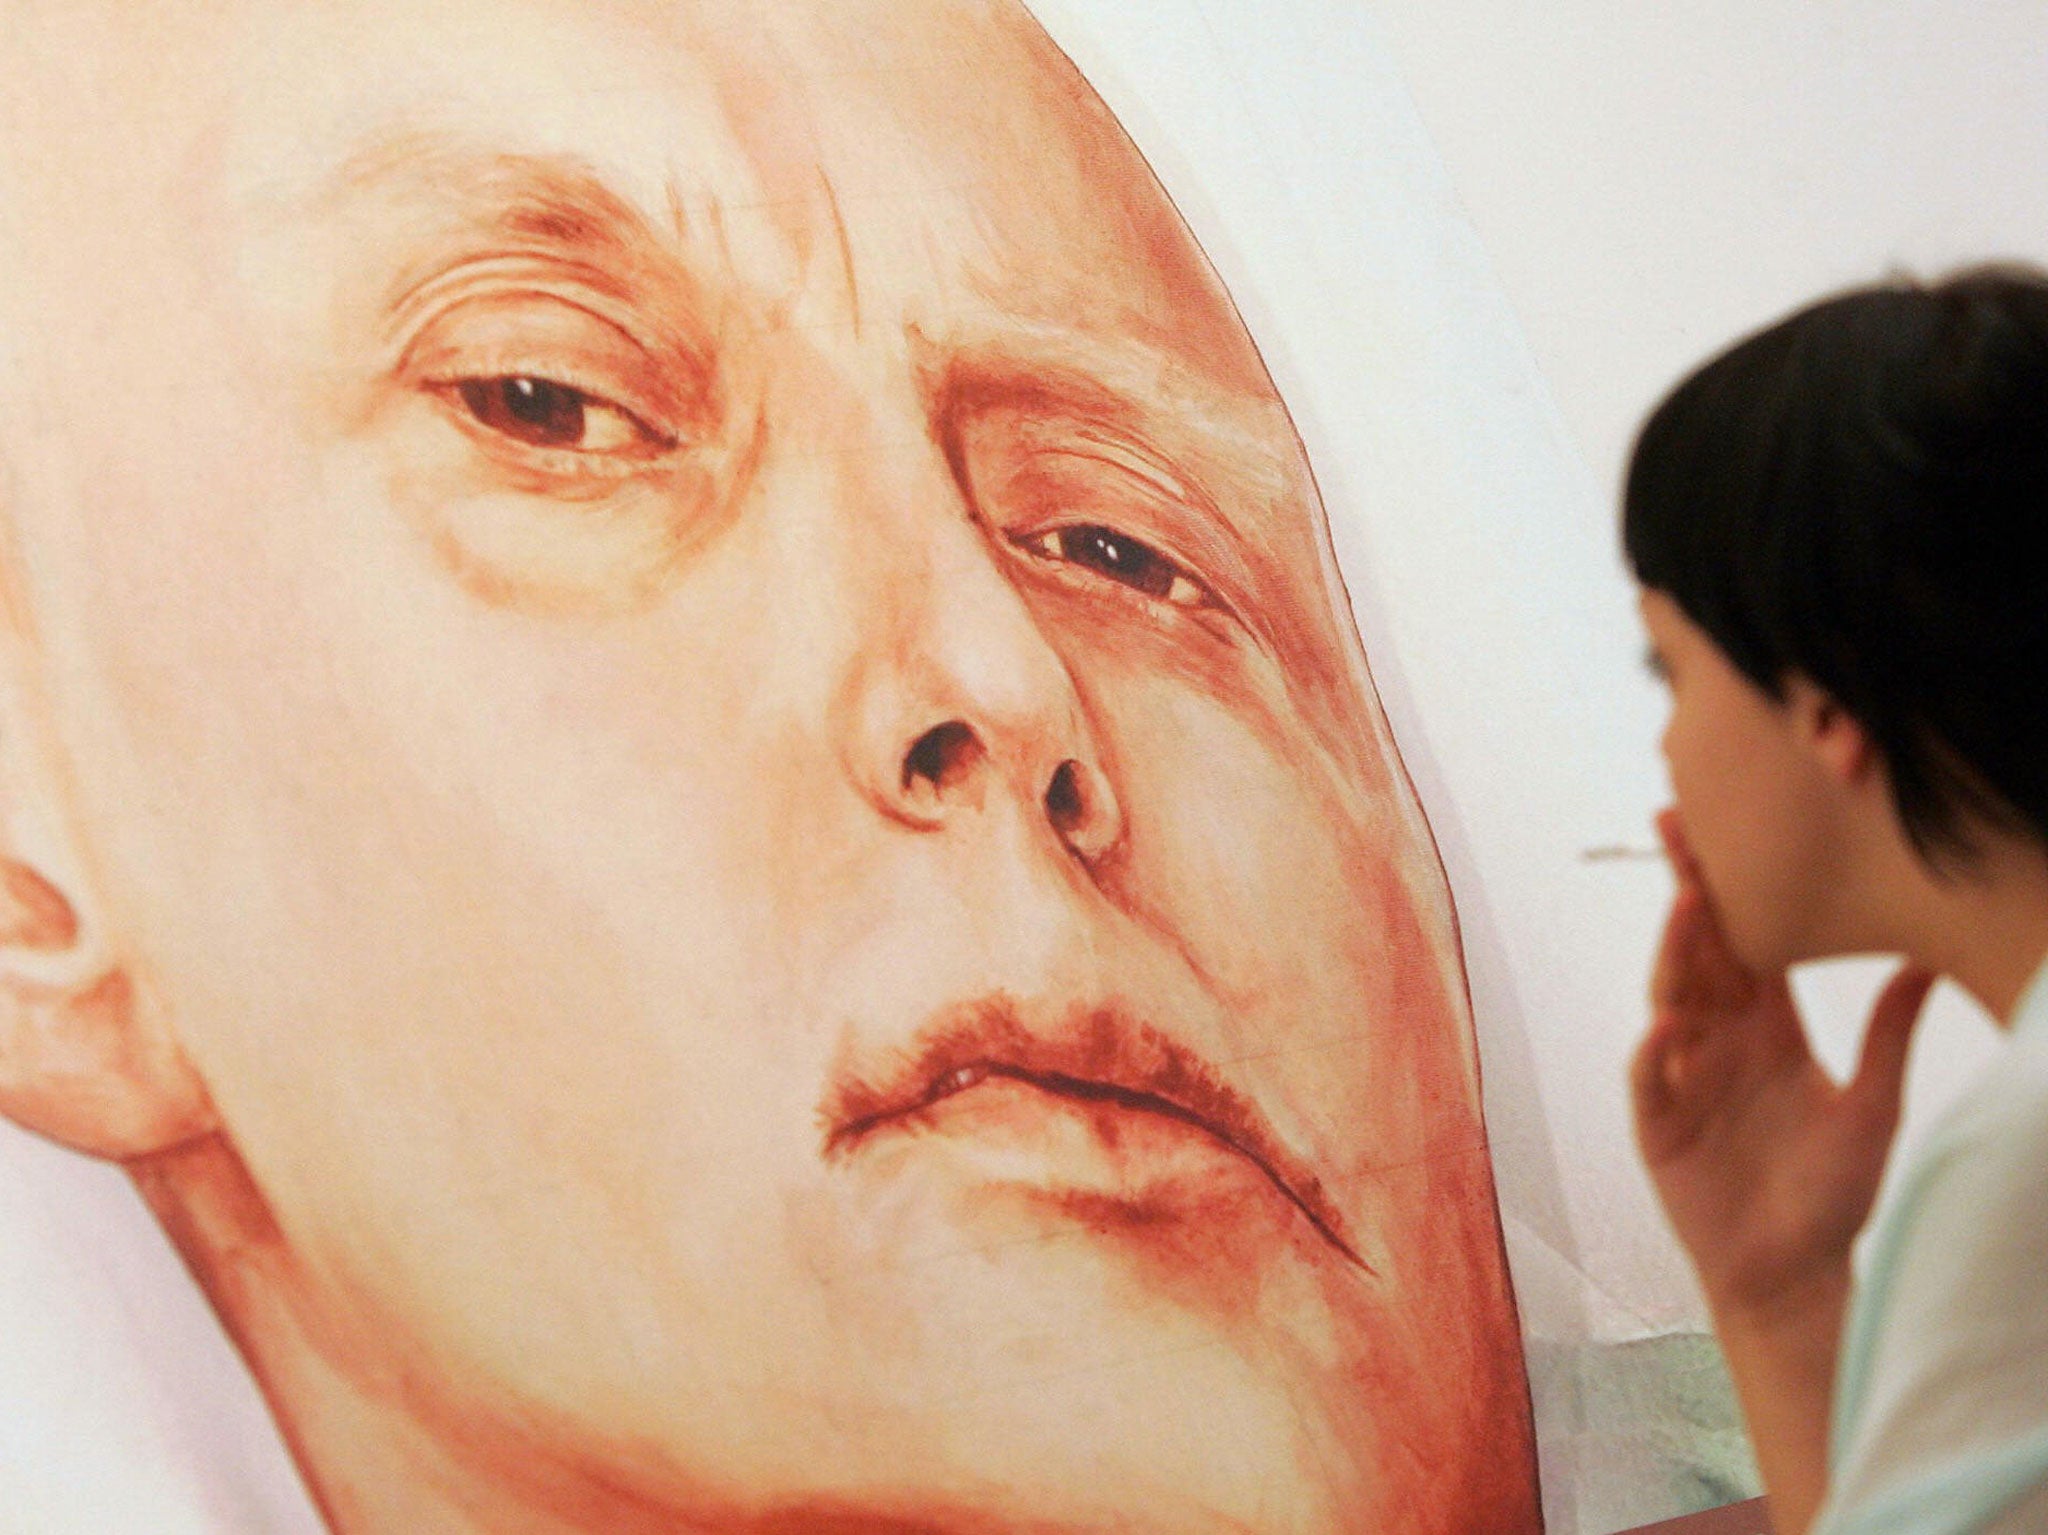 A visitor looks at a painting showing former Russian spy Alexander Litvinenko, by Dmitry Vrubel and Viktoria Timofeyeva painters in the Marat Guelman gallery in Moscow, 23 May 2007.